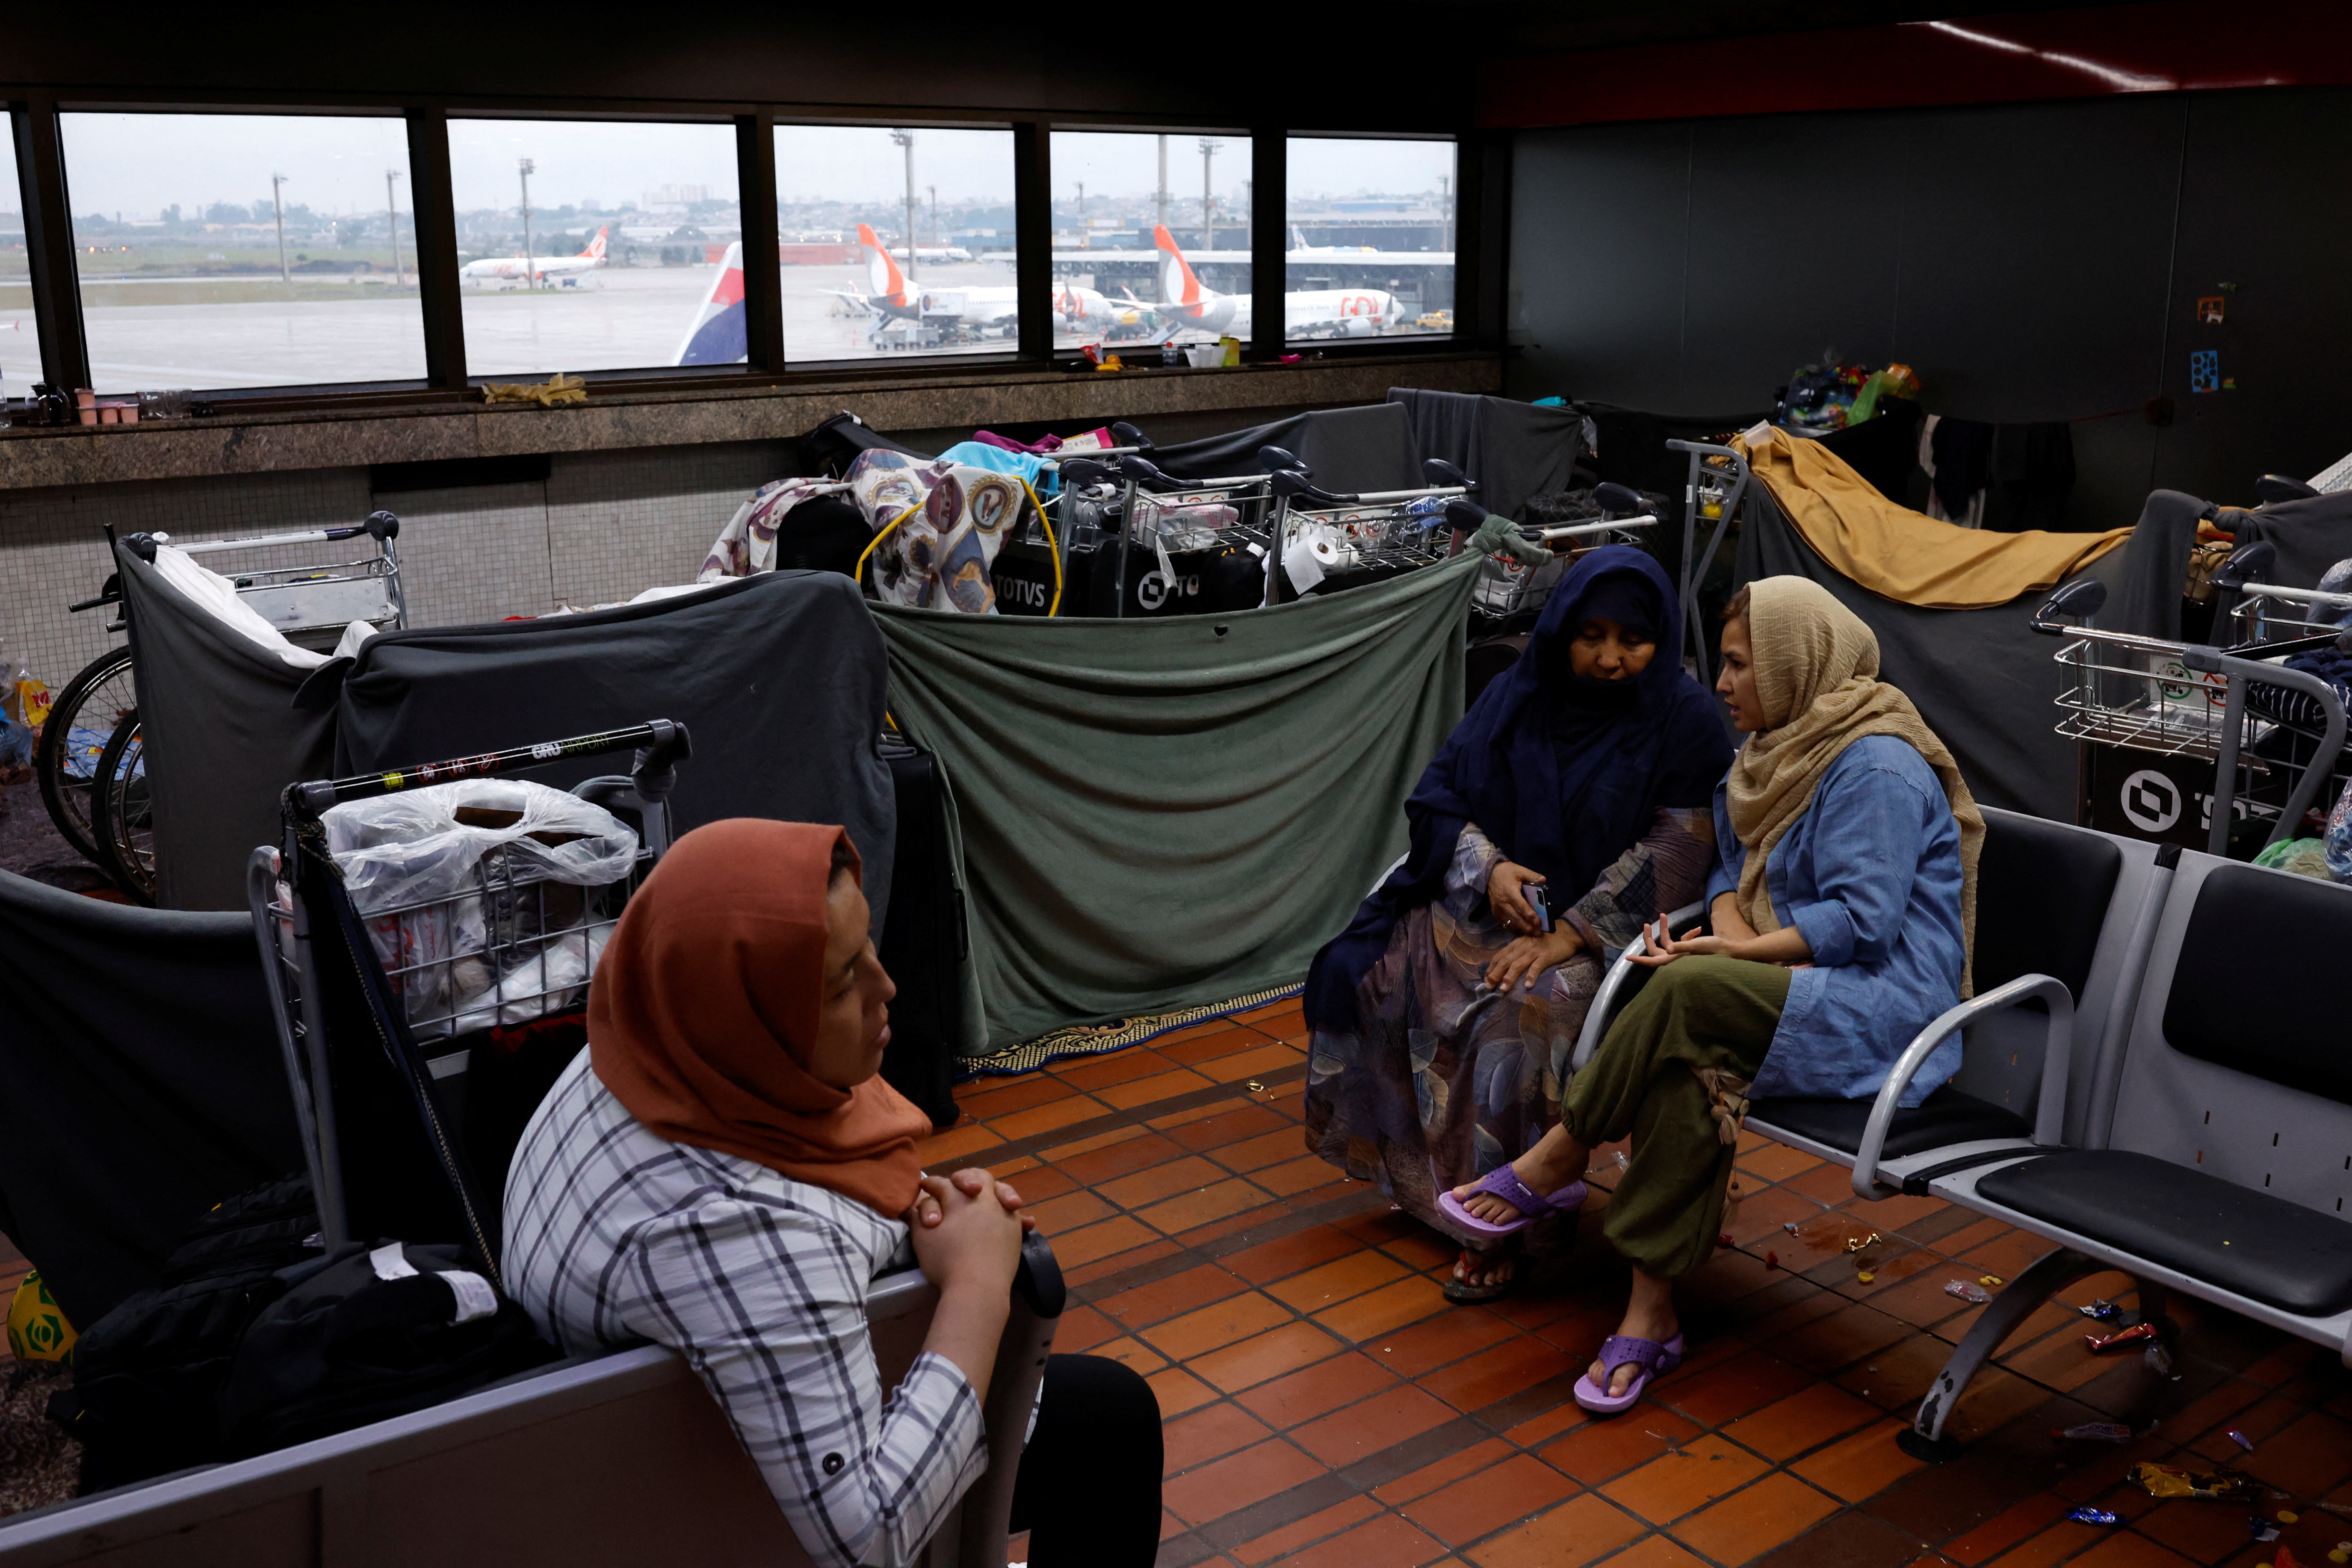 Afghans camp at Sao Paulo International airport in search of refuge